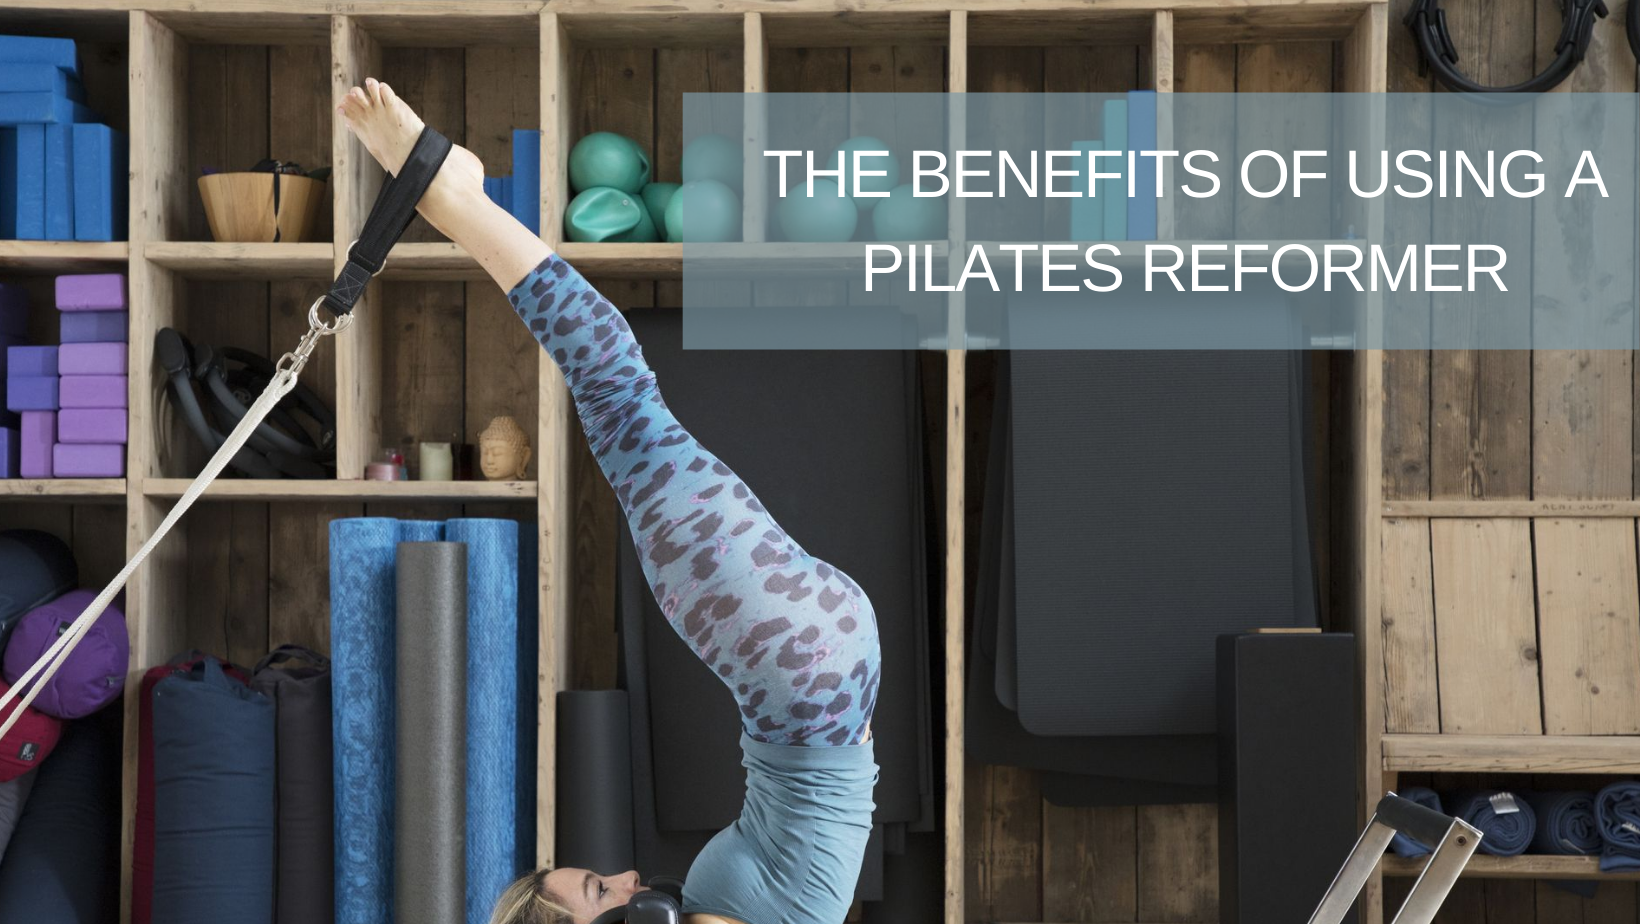 The Benefits Of Using A Pilates Reformer